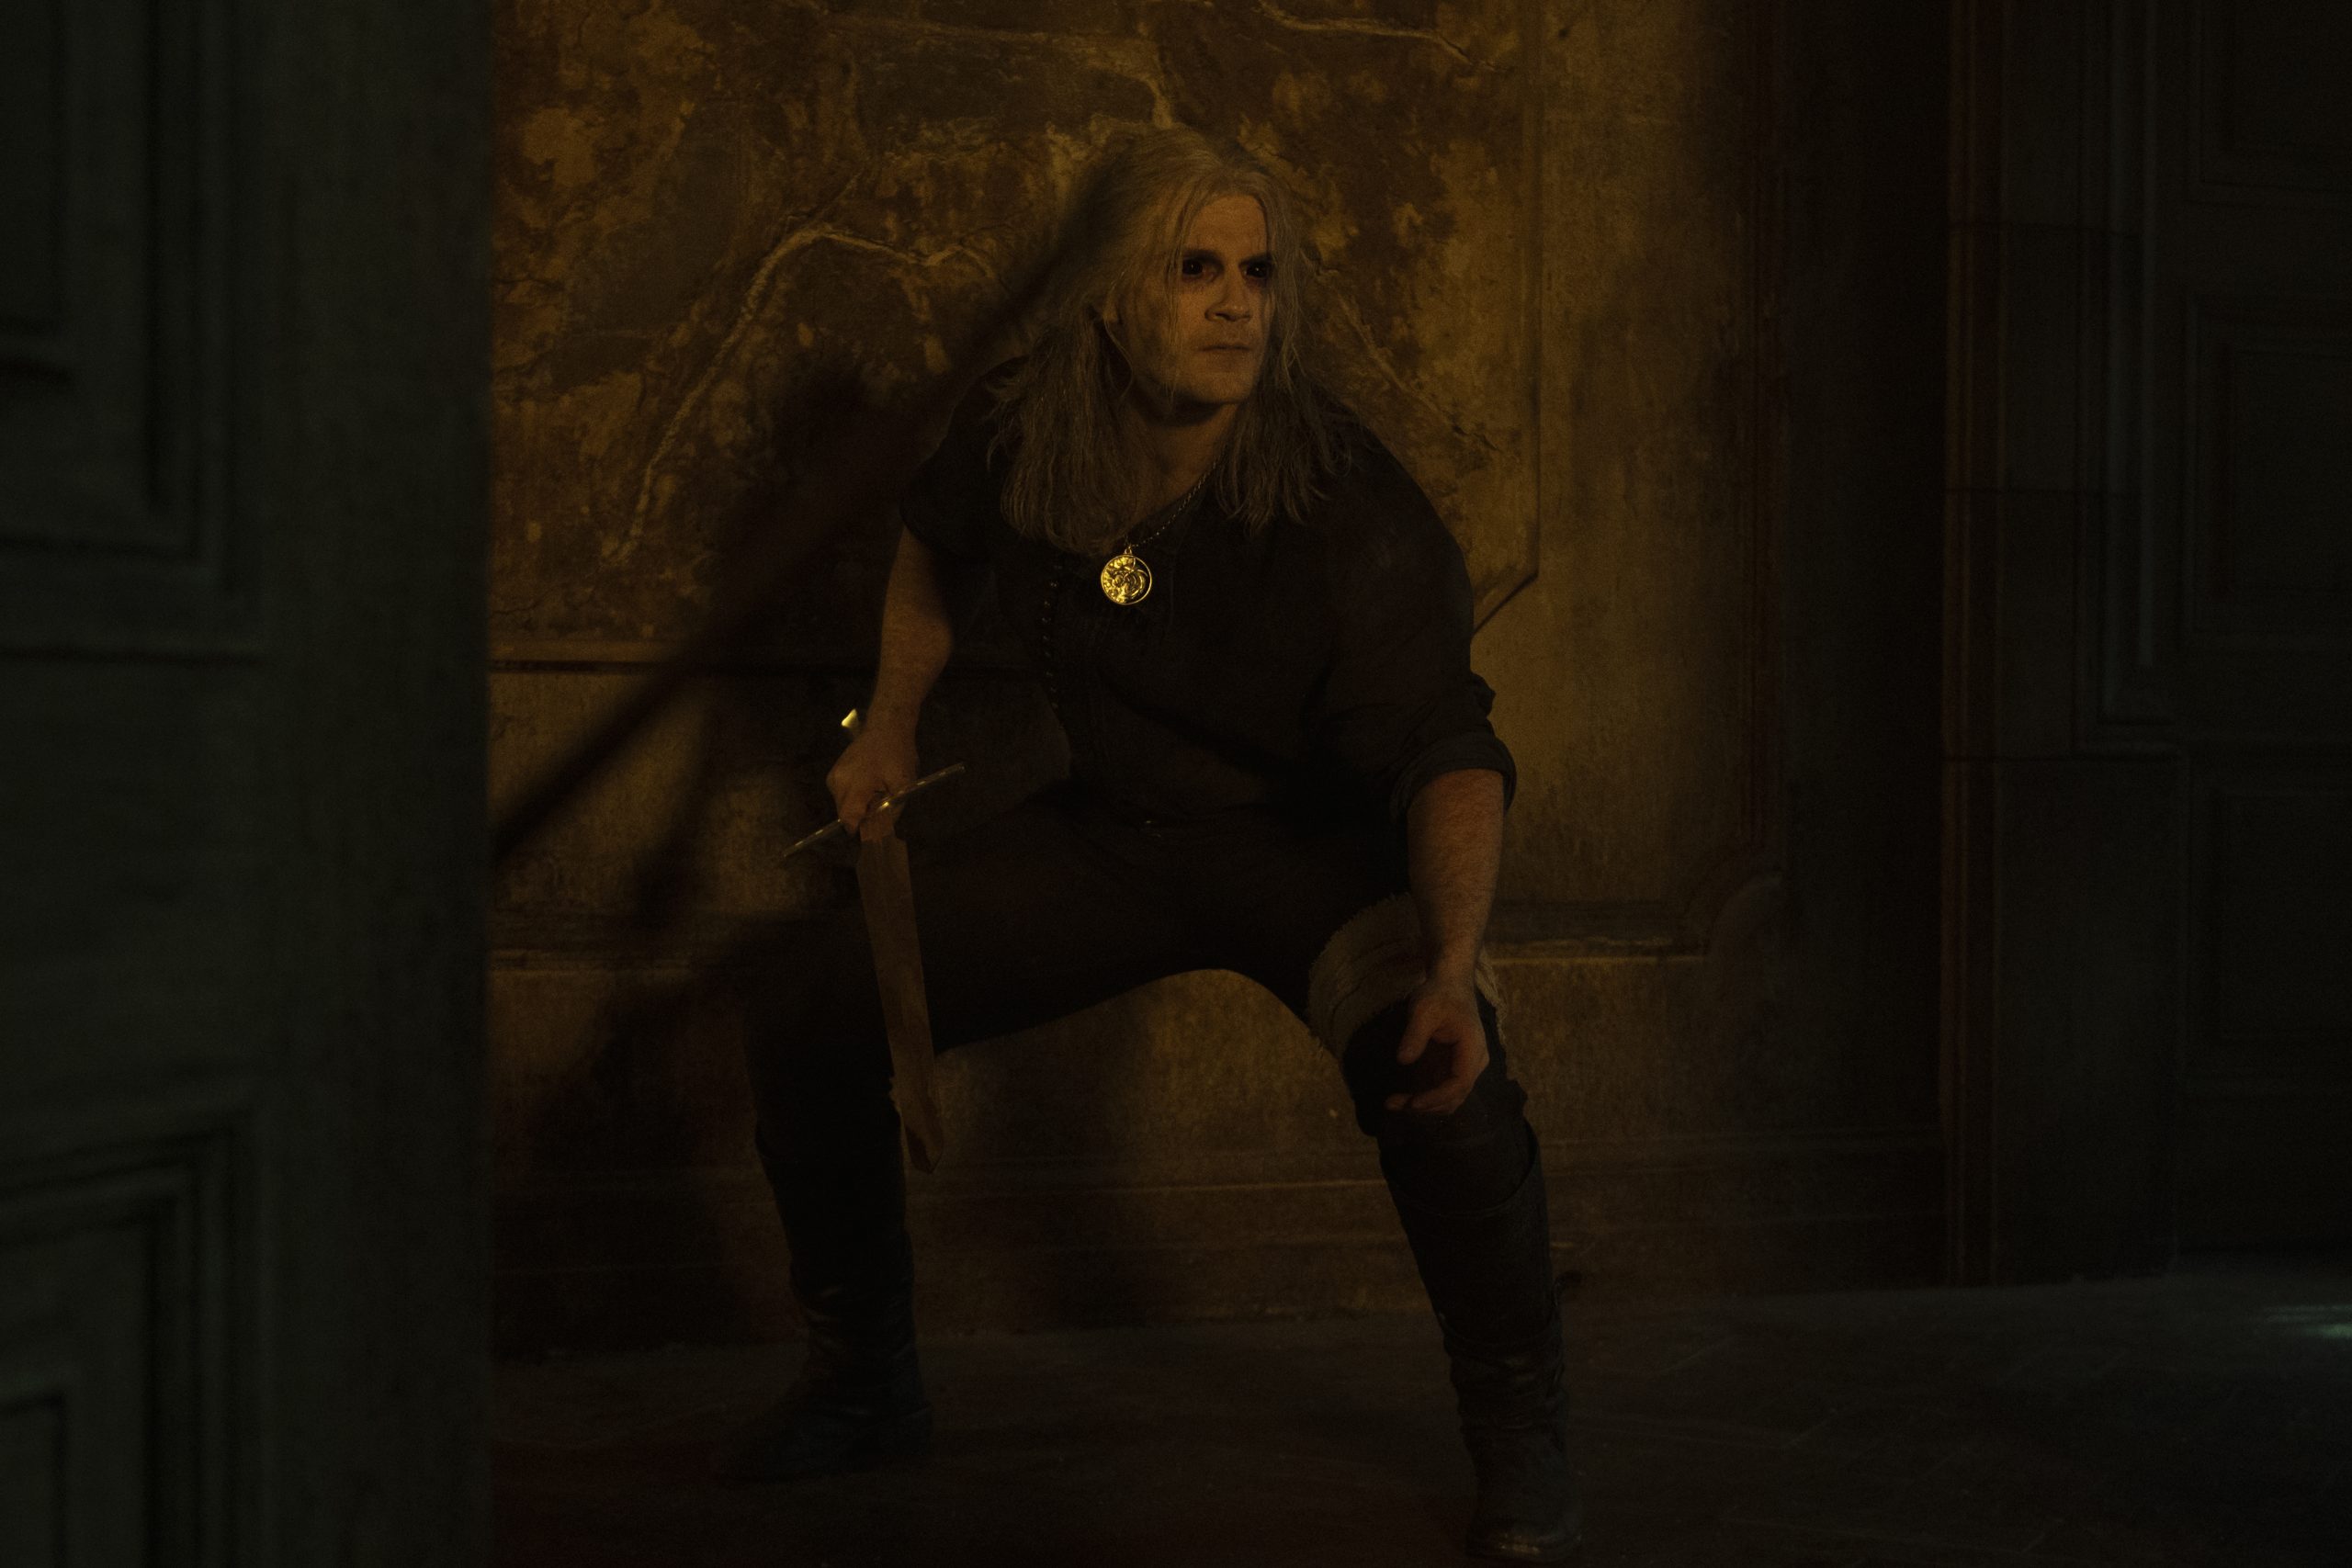 Geralt (Henry Cavill) adjust his vision for a low-light setting in The Witcher Season 2 Episode 2 “Kaer Morhen” (2021), Netflix